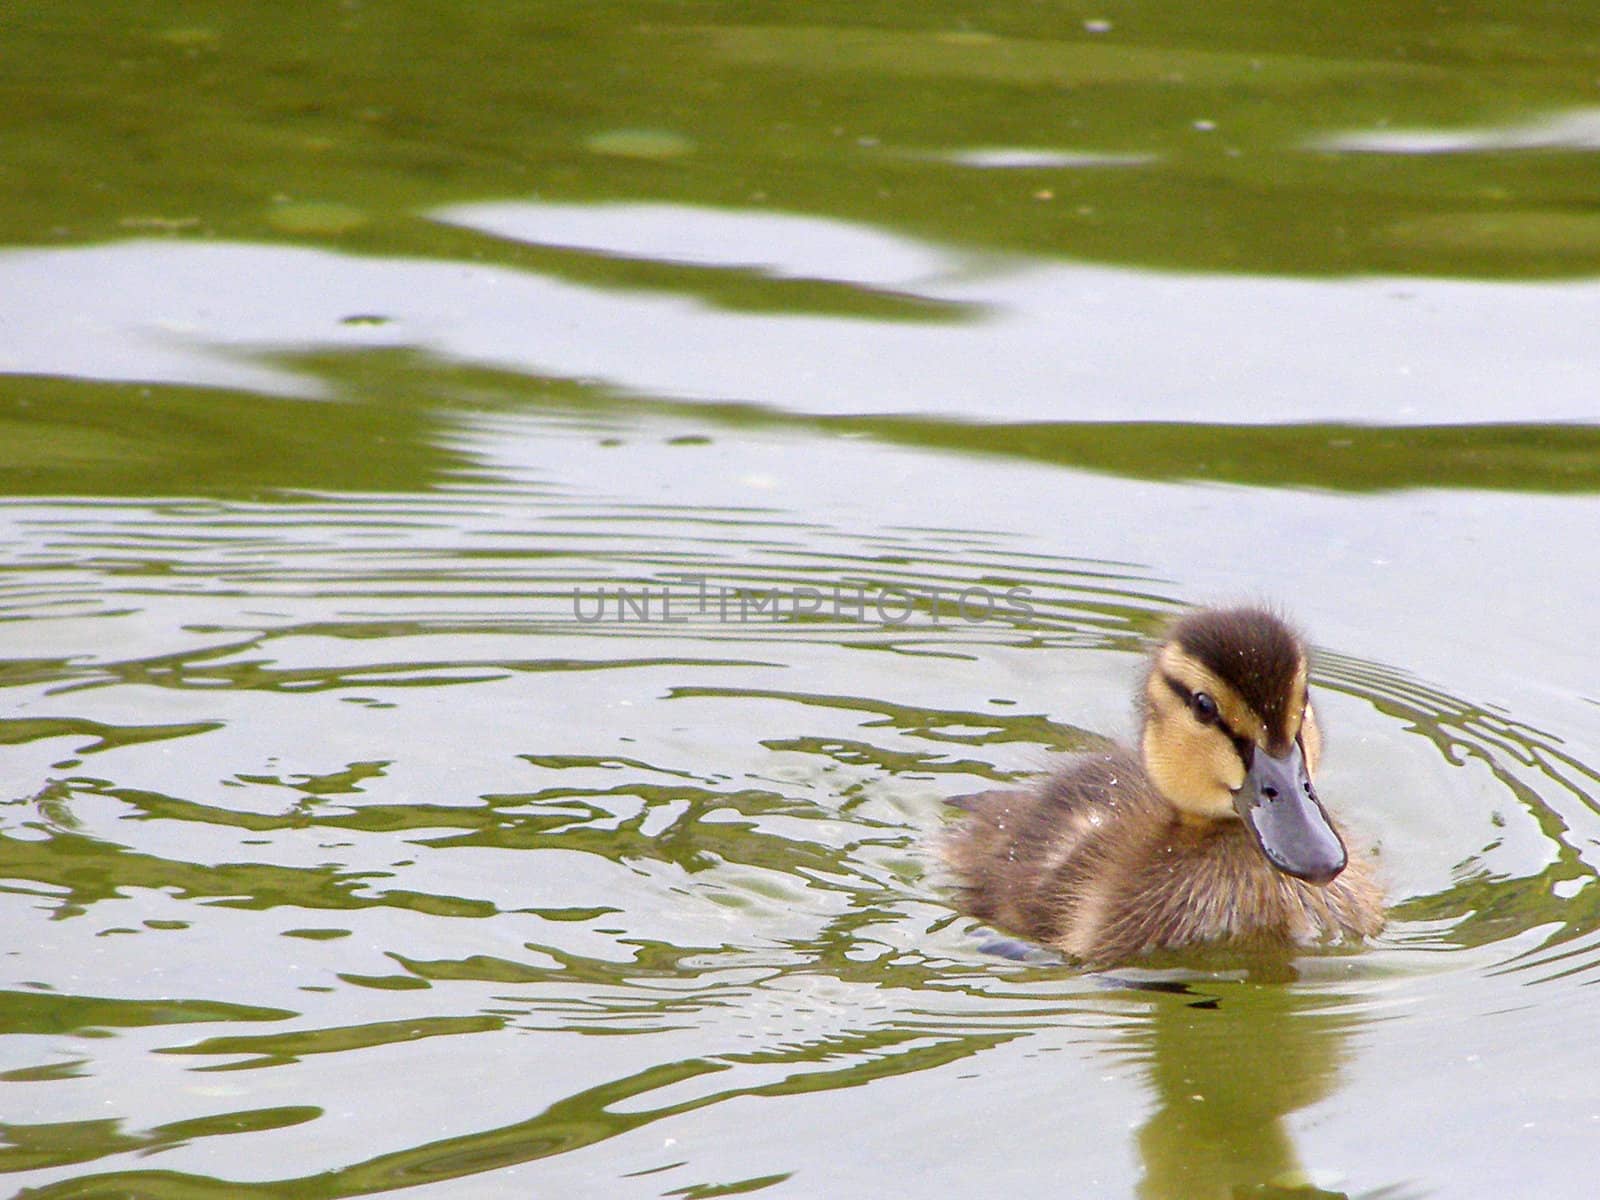 Duckling on the water  by Clarushka